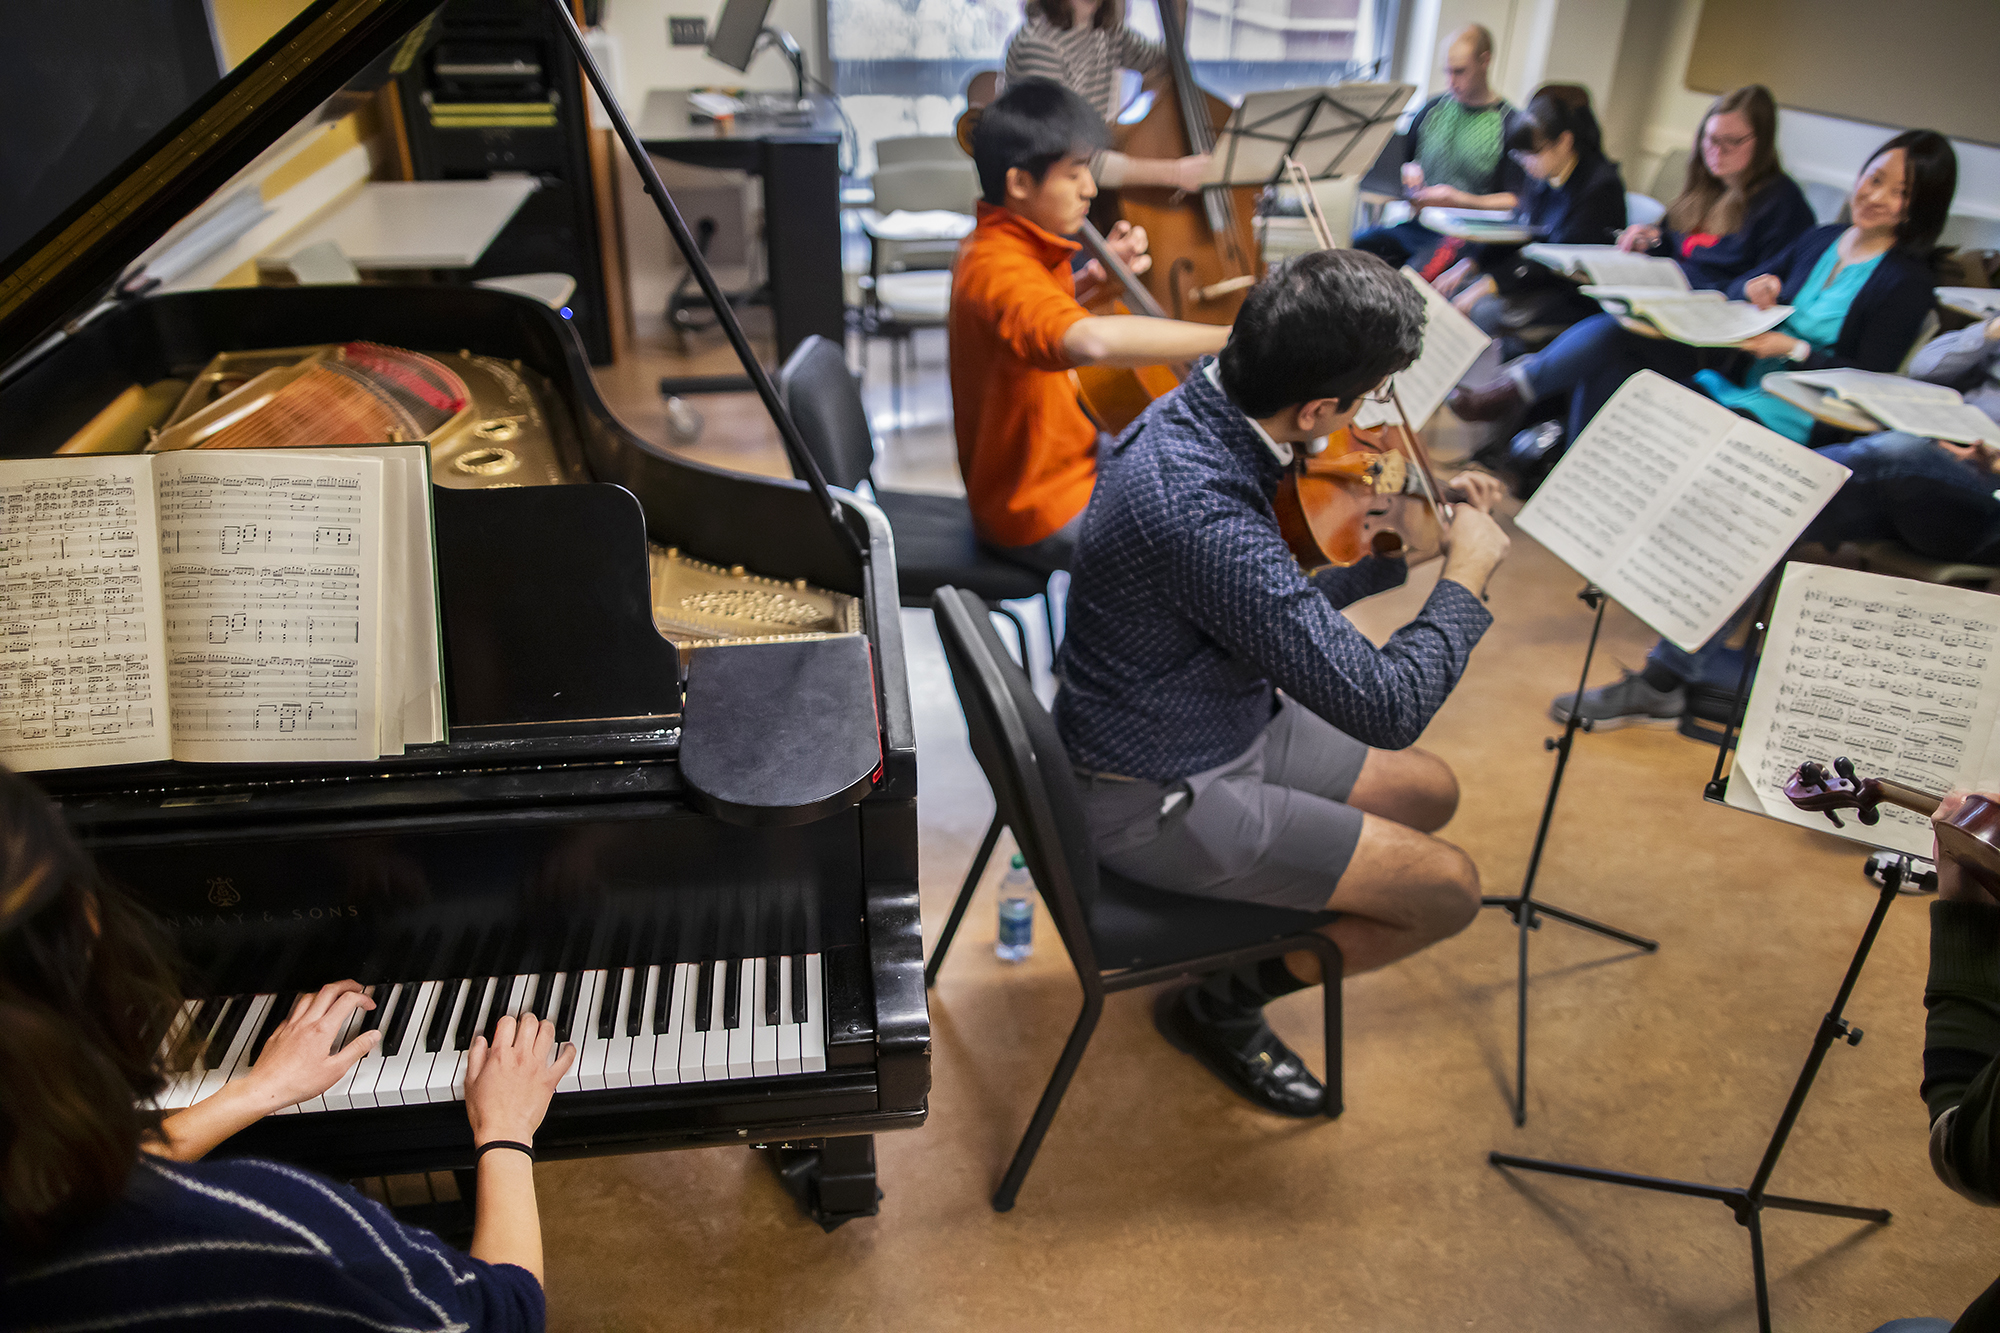 A view that shows a student's hands playing the piano and other students playing the viola, cello and bass in front of class.